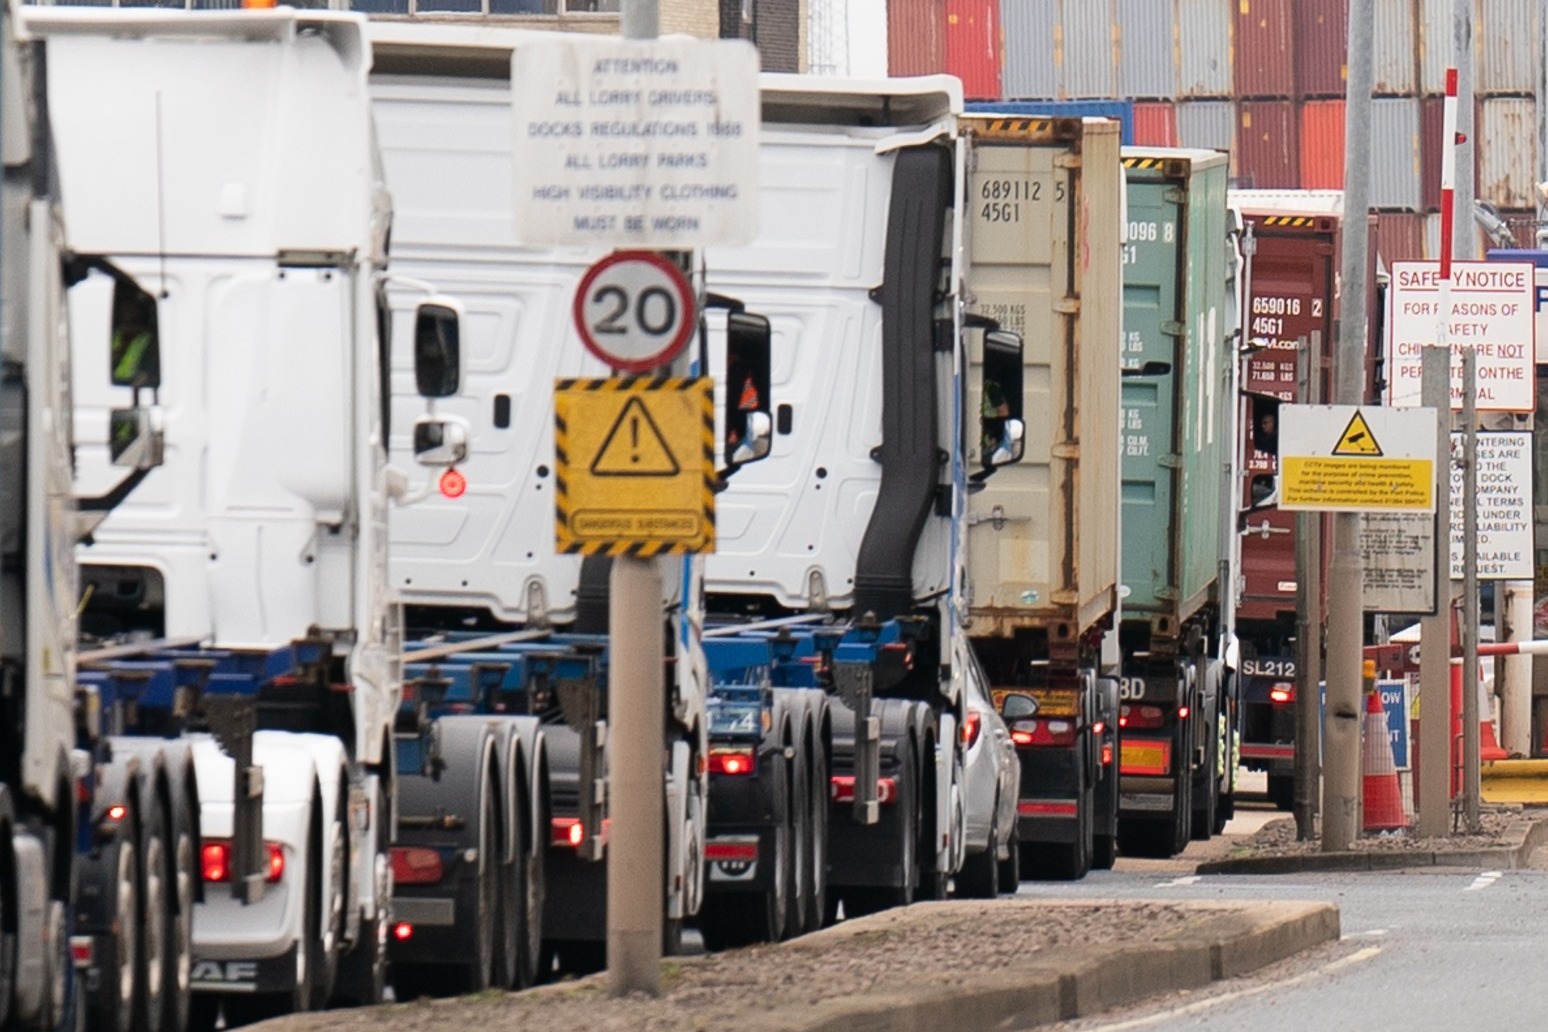 Haulage boss to pay £180,000 to families of 39 container death victims 